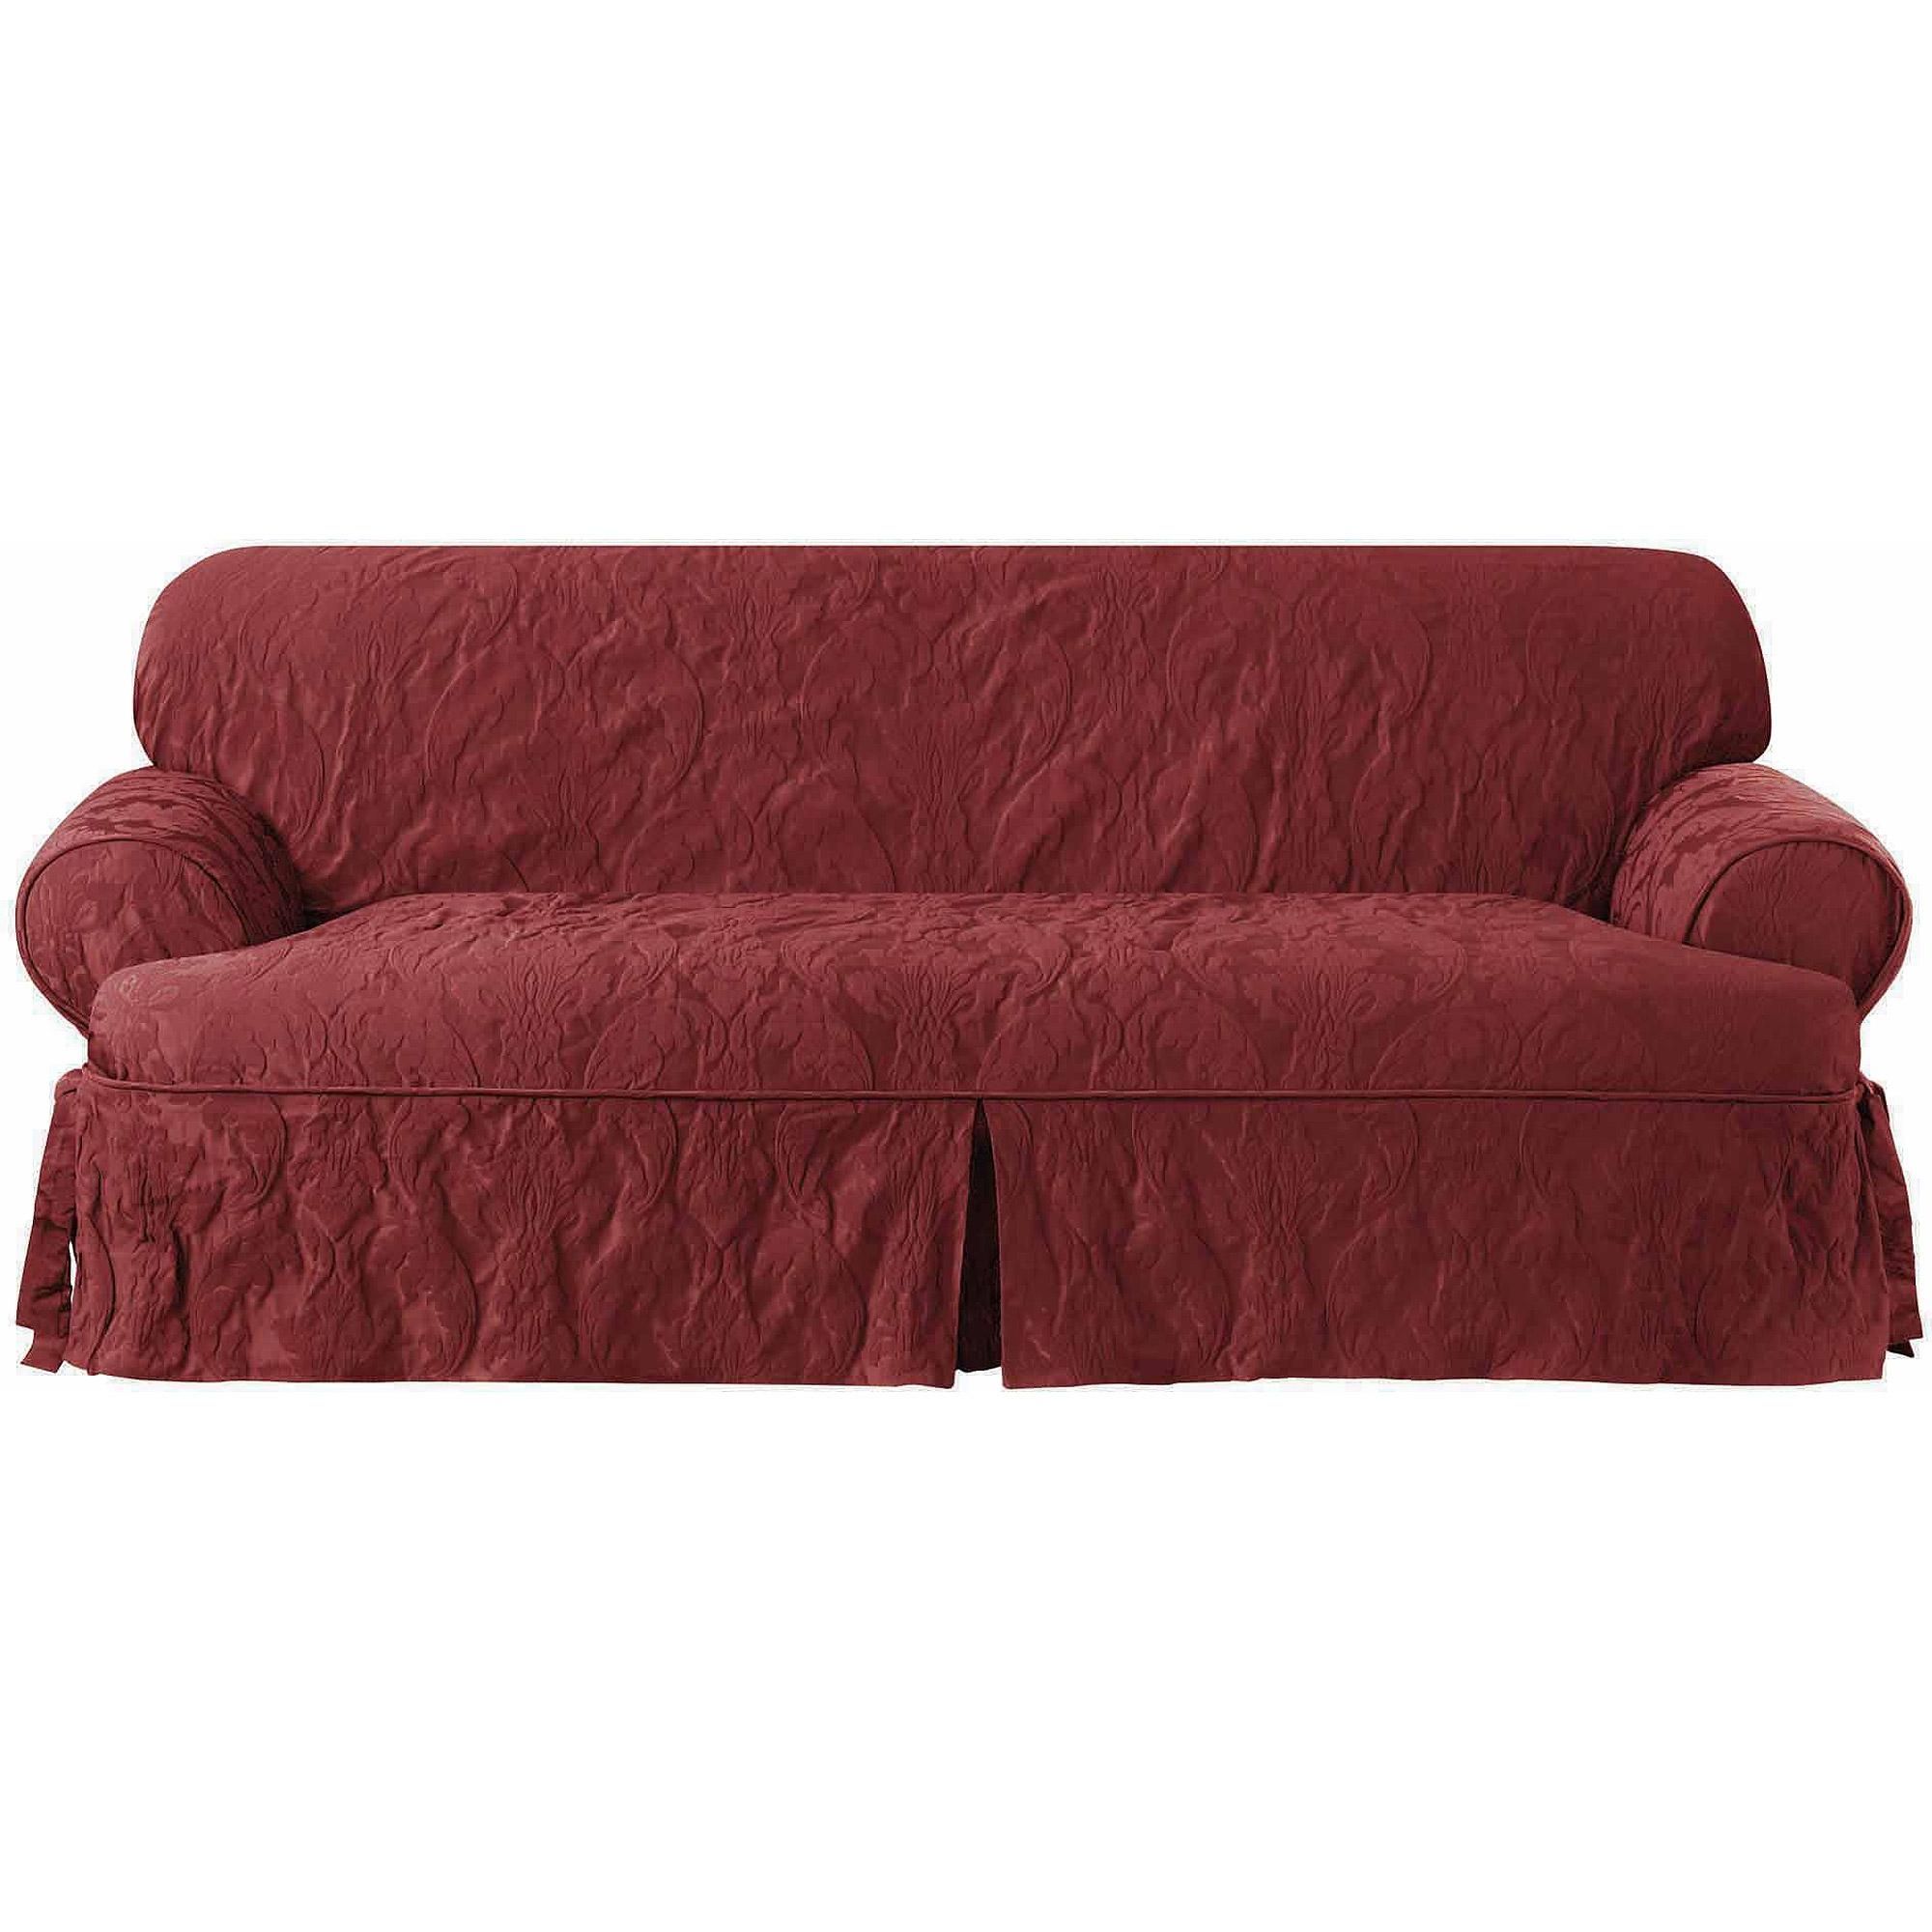 Furniture: Update Your Living Room With Best Sofa Slipcover Design For 3 Piece Sofa Slipcovers (View 6 of 20)